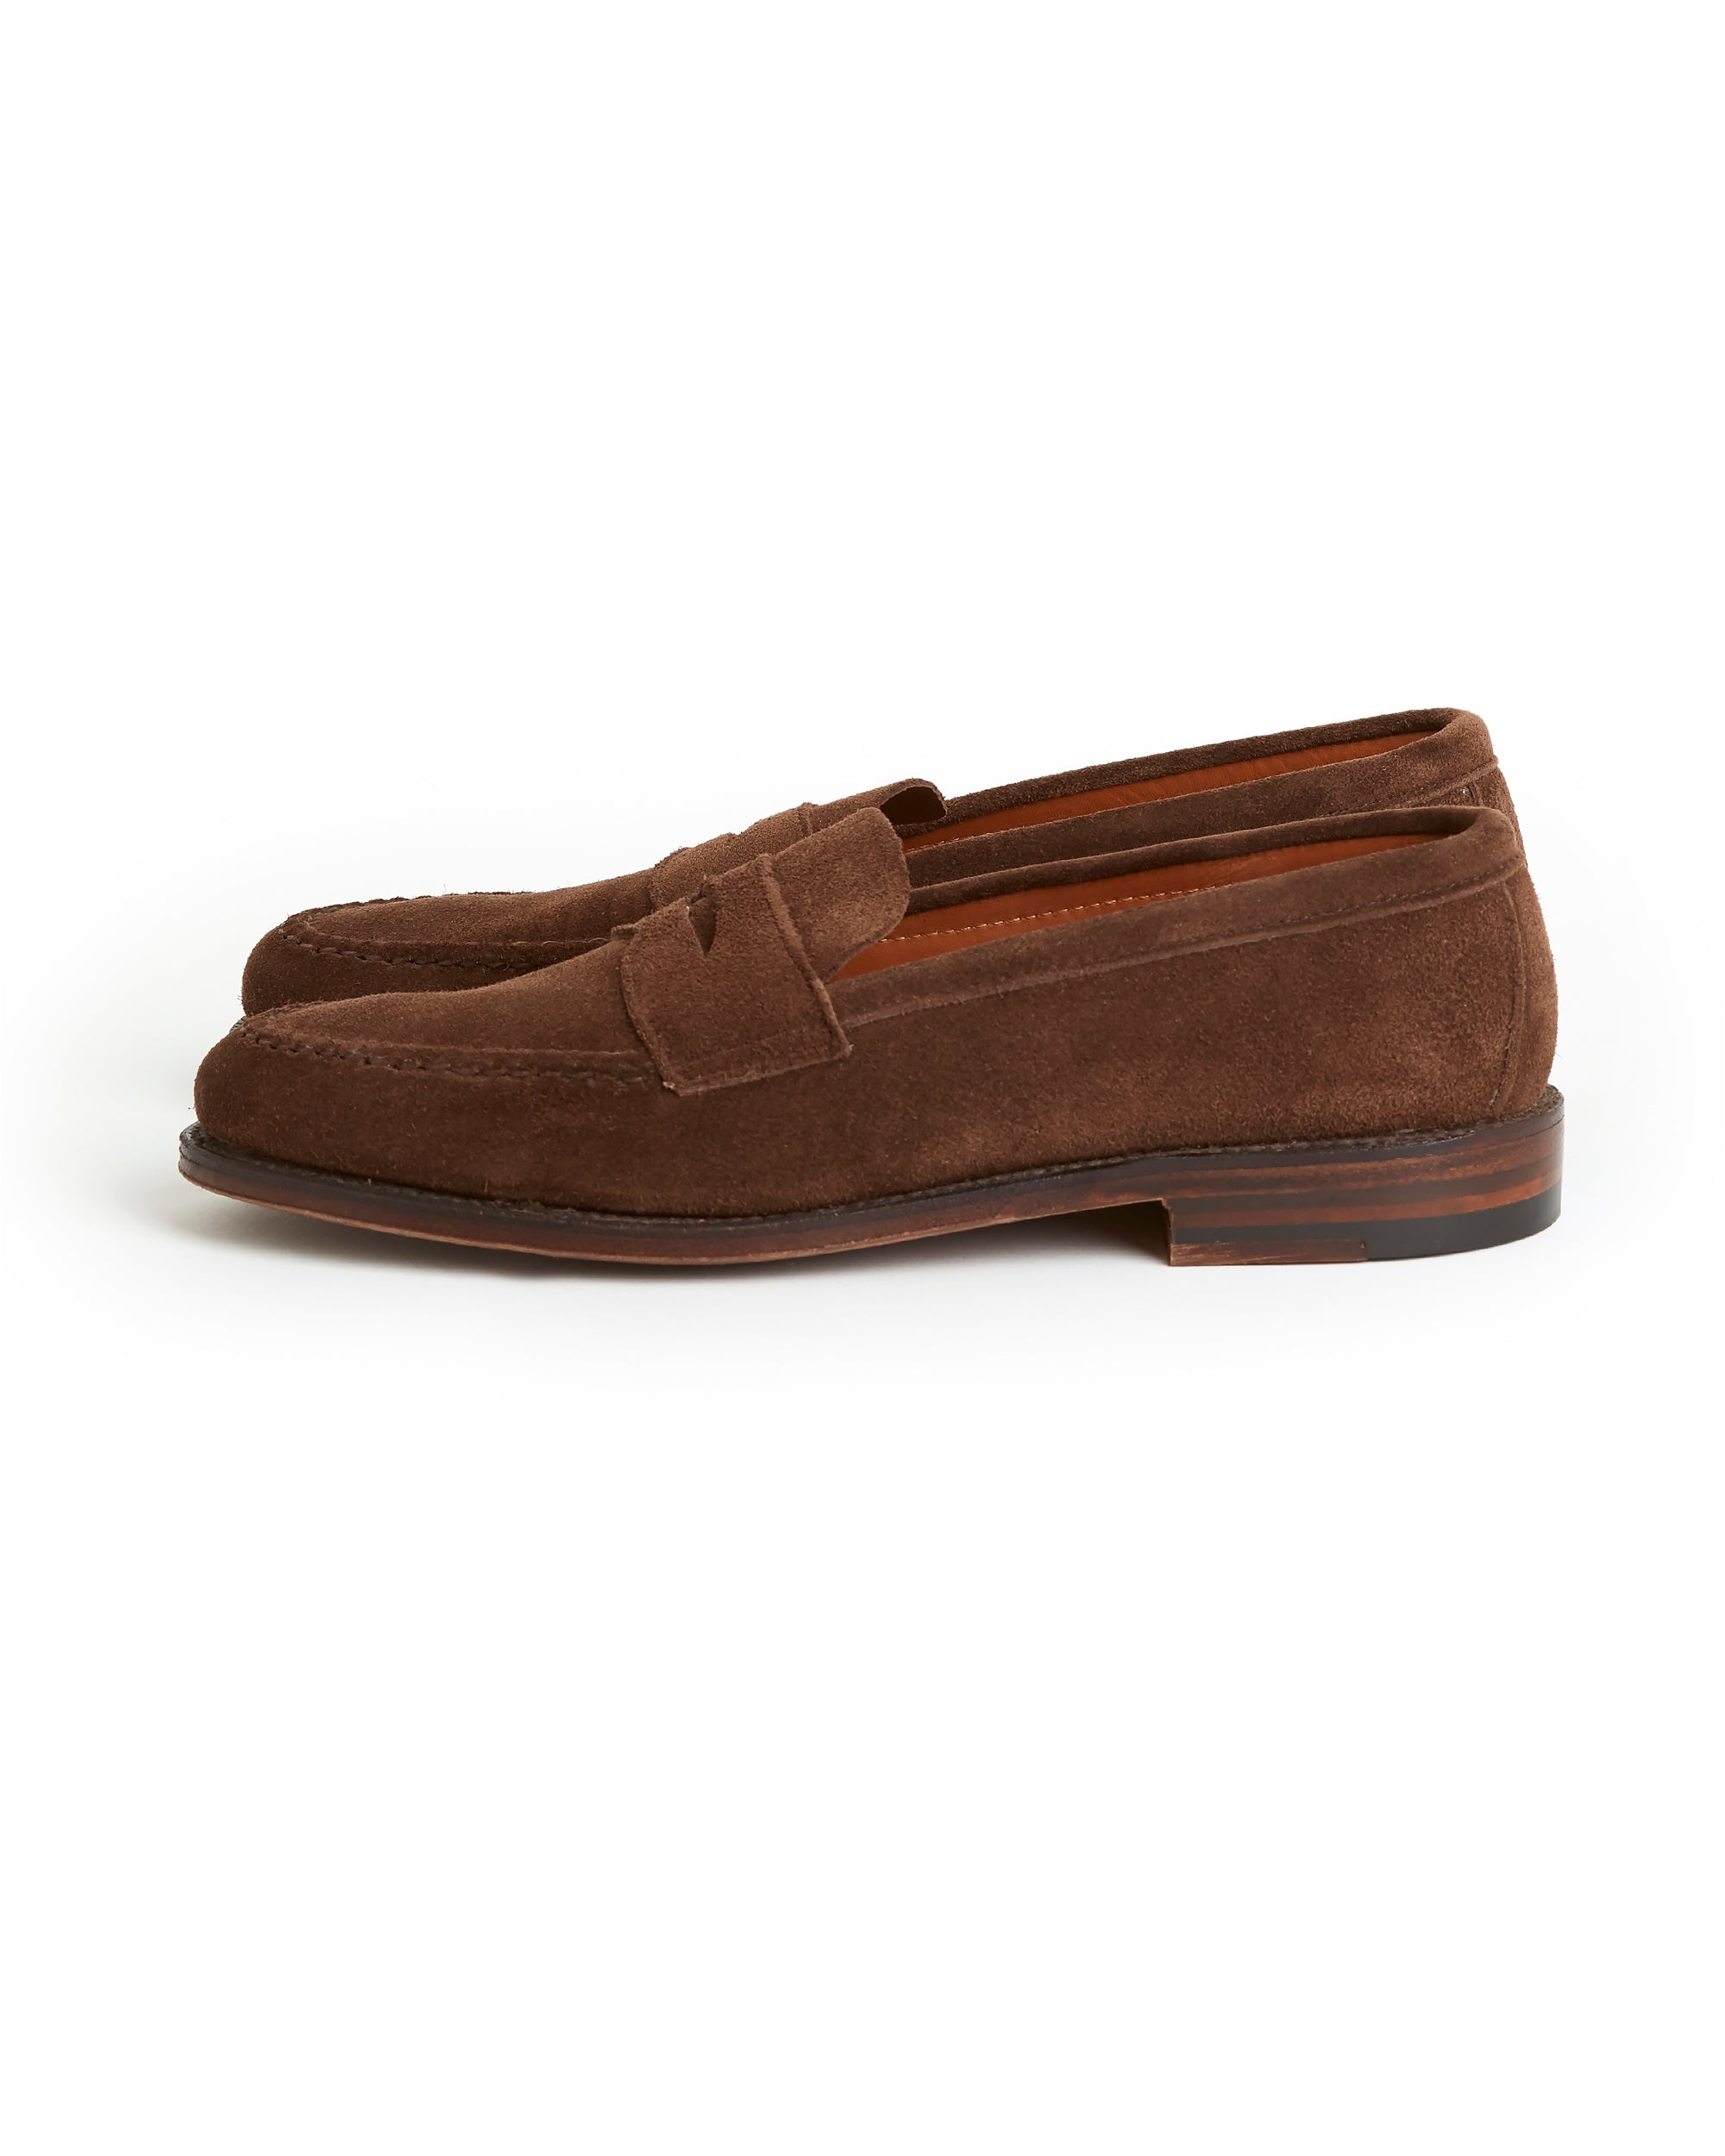 Alden Unlined Suede Penny Loafer: Dark Brown 6245F – Trunk Clothiers